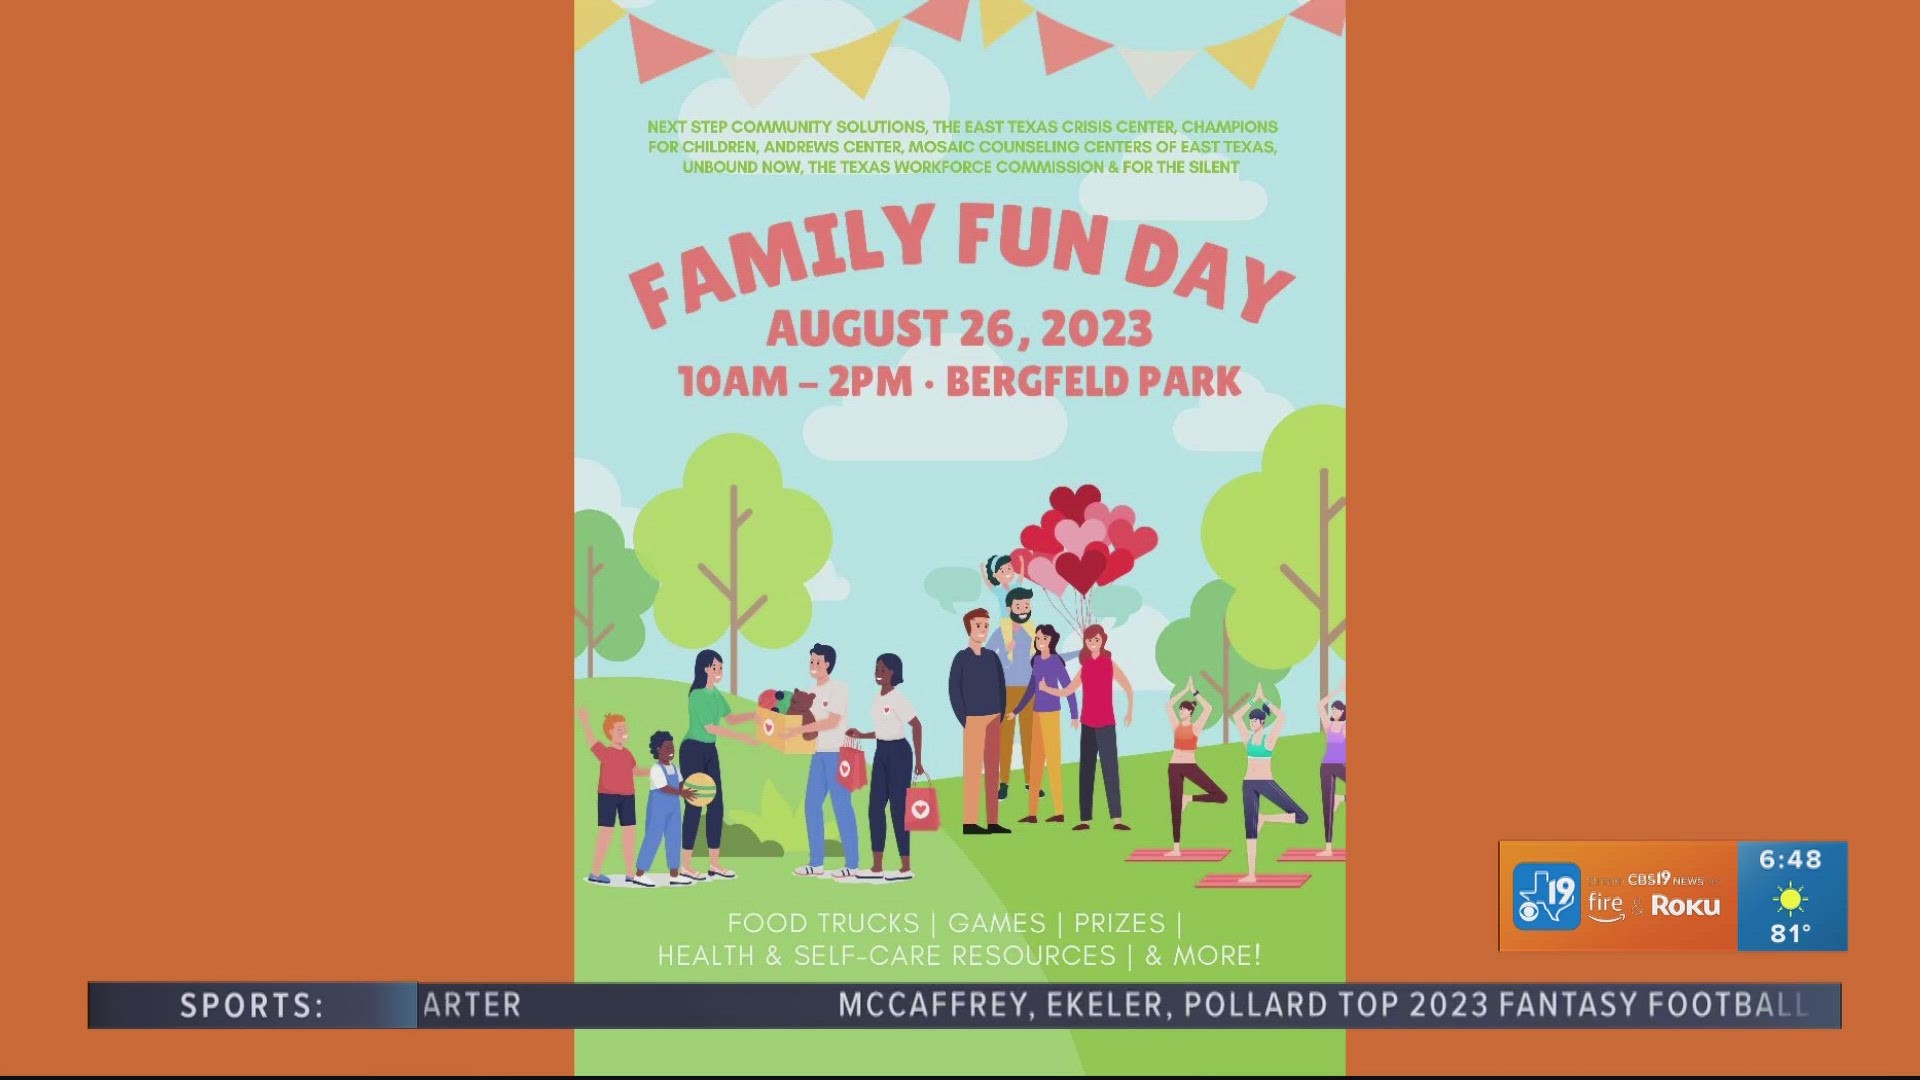 The East Texas Crisis Center is hosting its first Family Fun Day in Tyler!